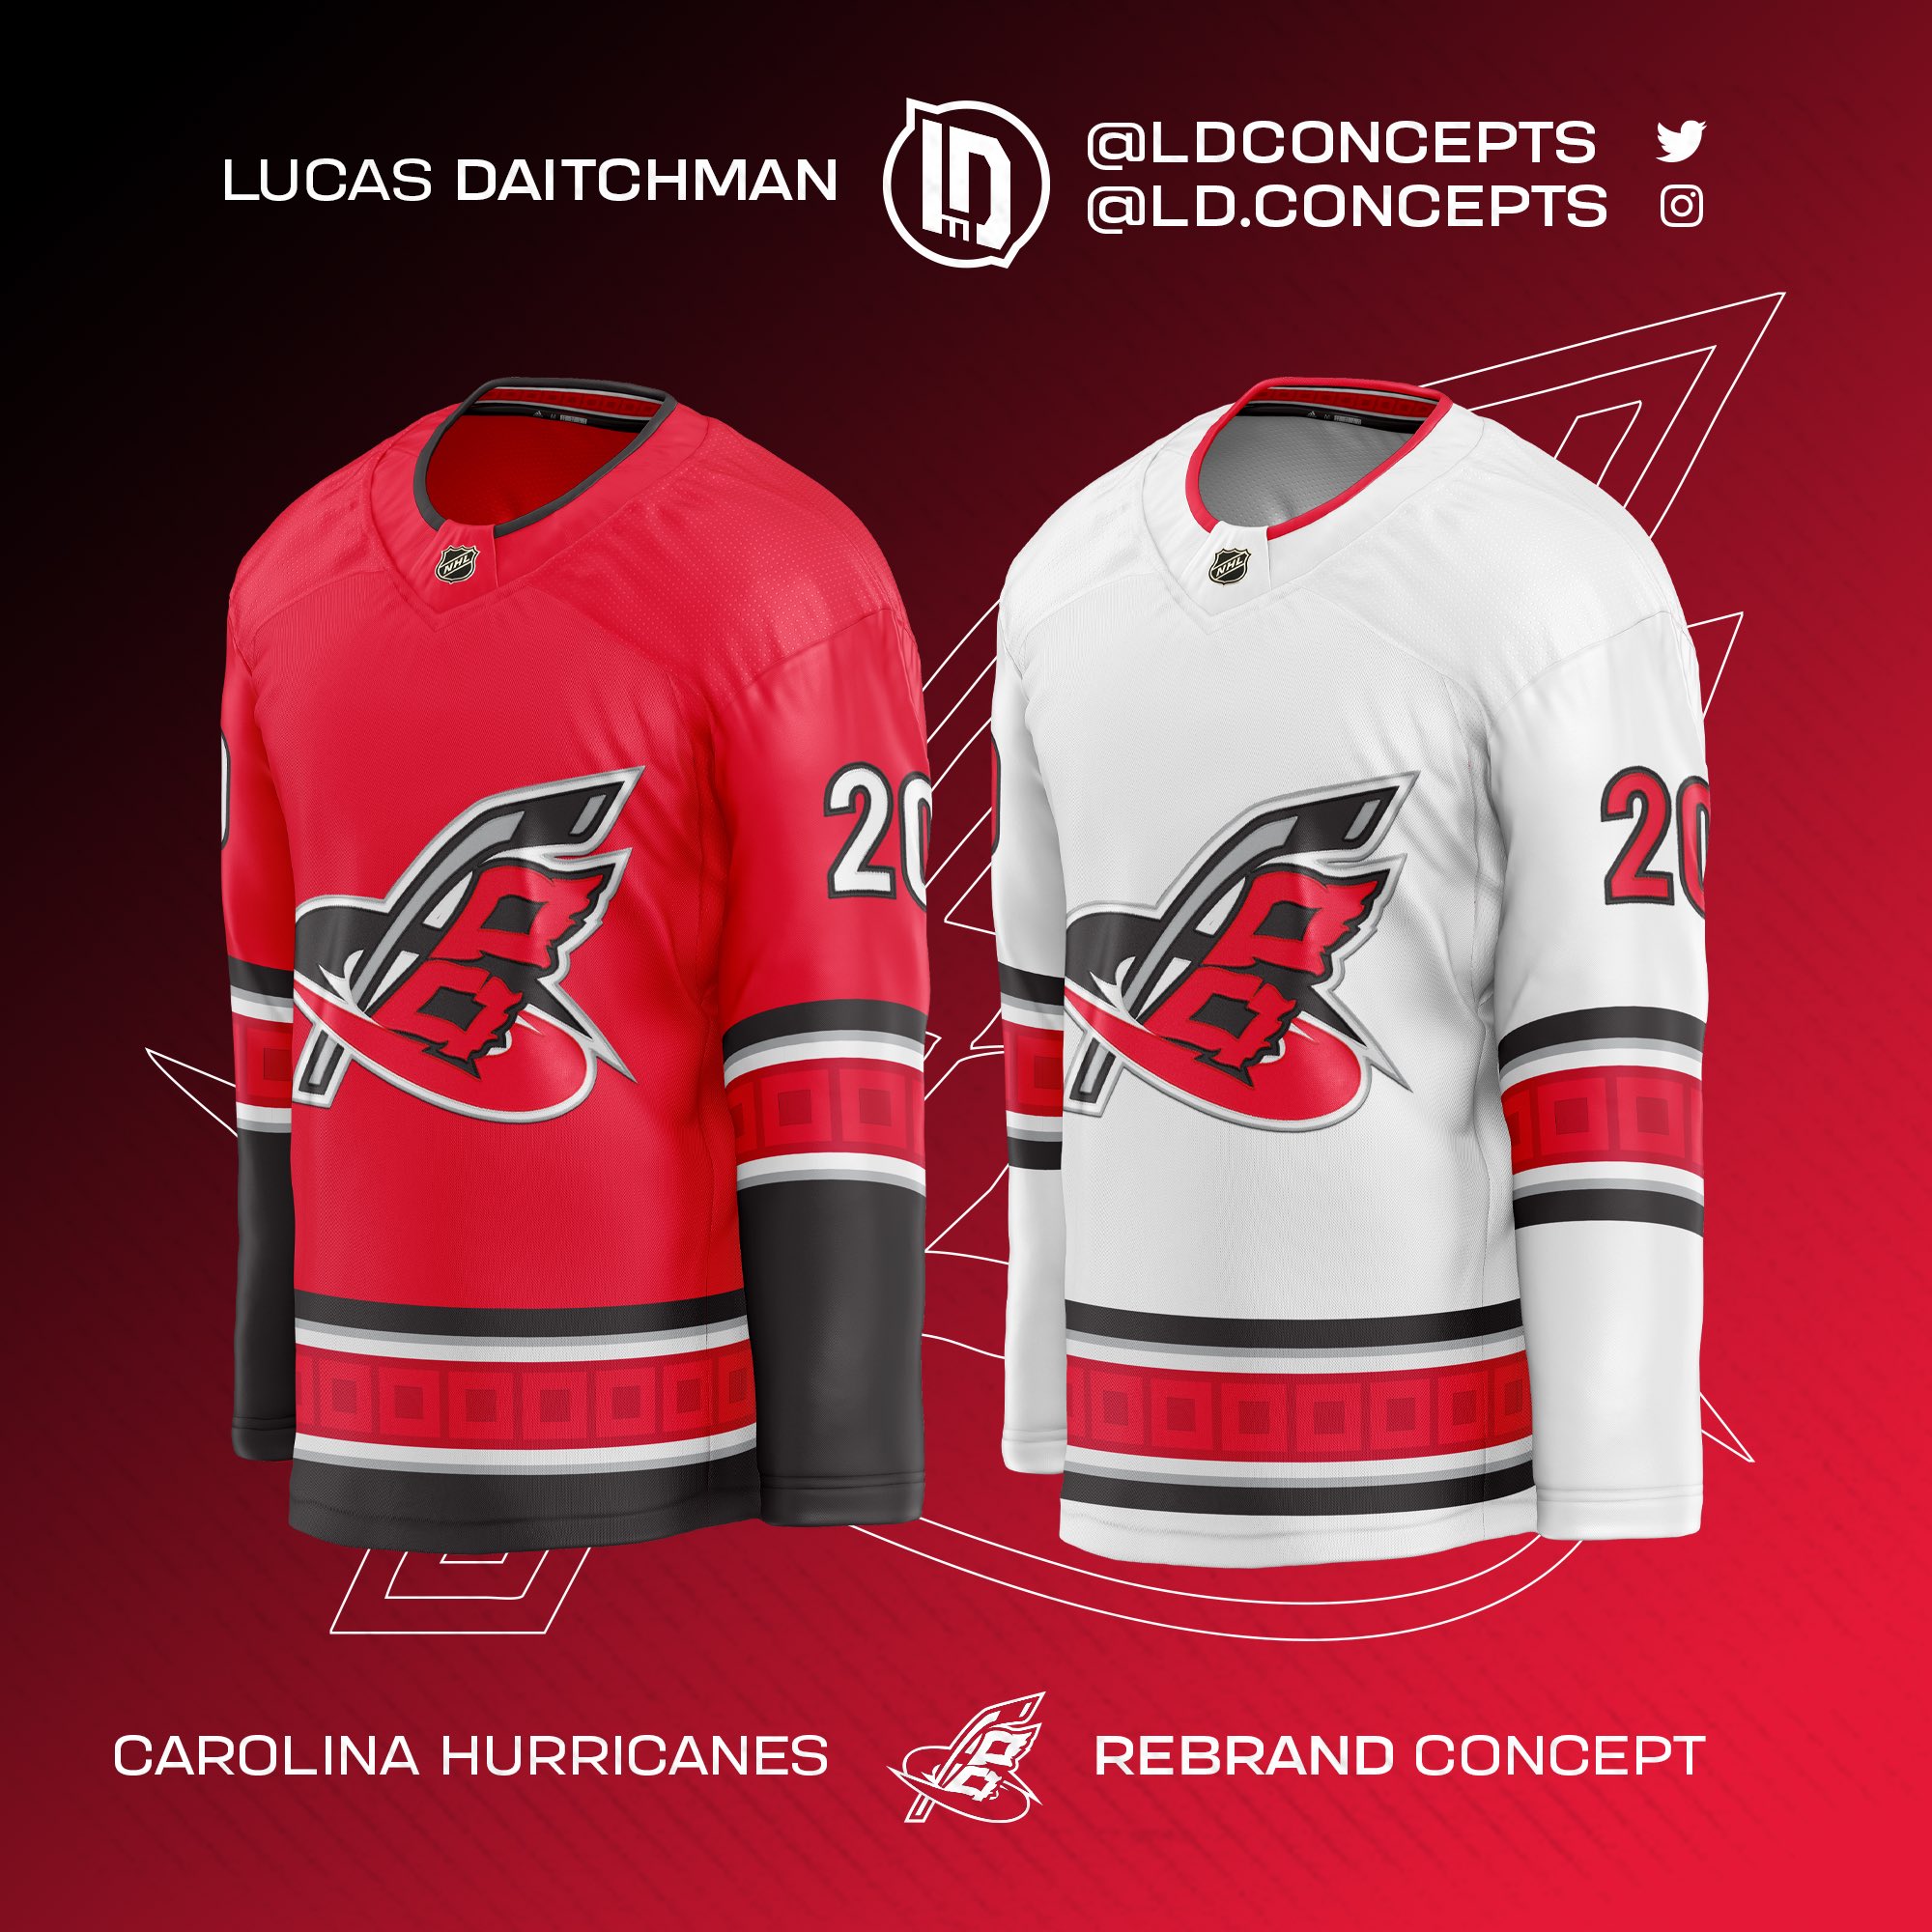 Lucas Daitchman on X: Here's a pair of jersey ideas for the 2023 # NHLAllStar tournament in South Florida. The wacky stripes play off the  event logo unveiled last month and keep things